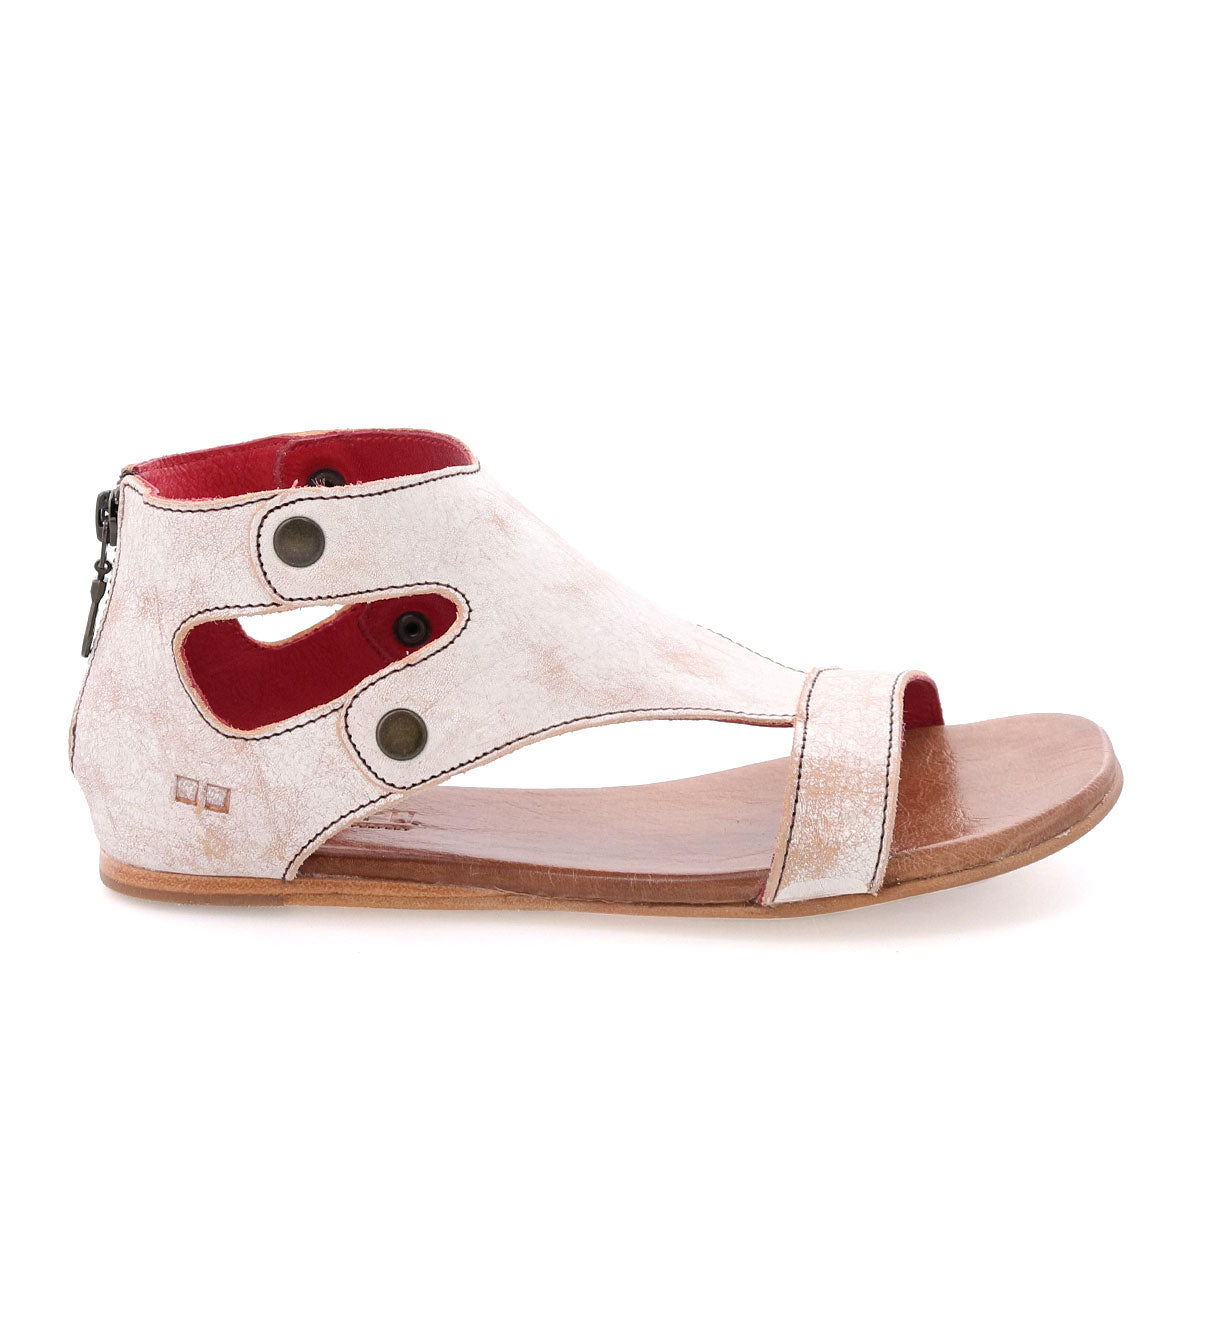 A women's white leather Soto sandal by Bed Stu.